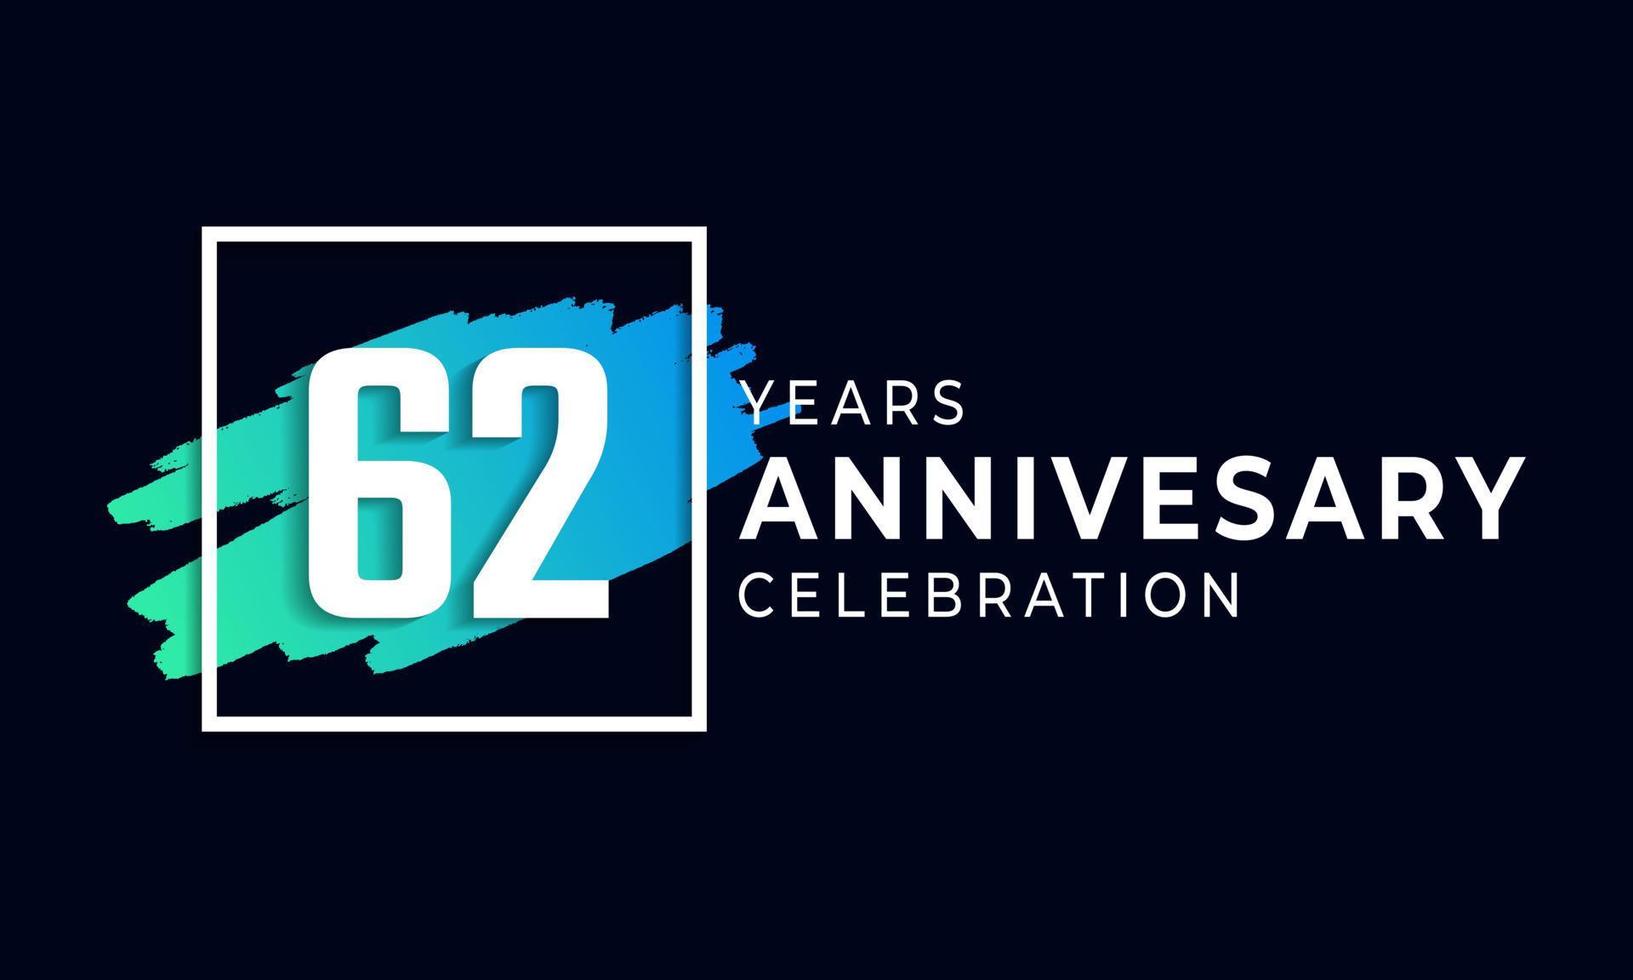 62 Year Anniversary Celebration with Blue Brush and Square Symbol. Happy Anniversary Greeting Celebrates Event Isolated on Black Background vector